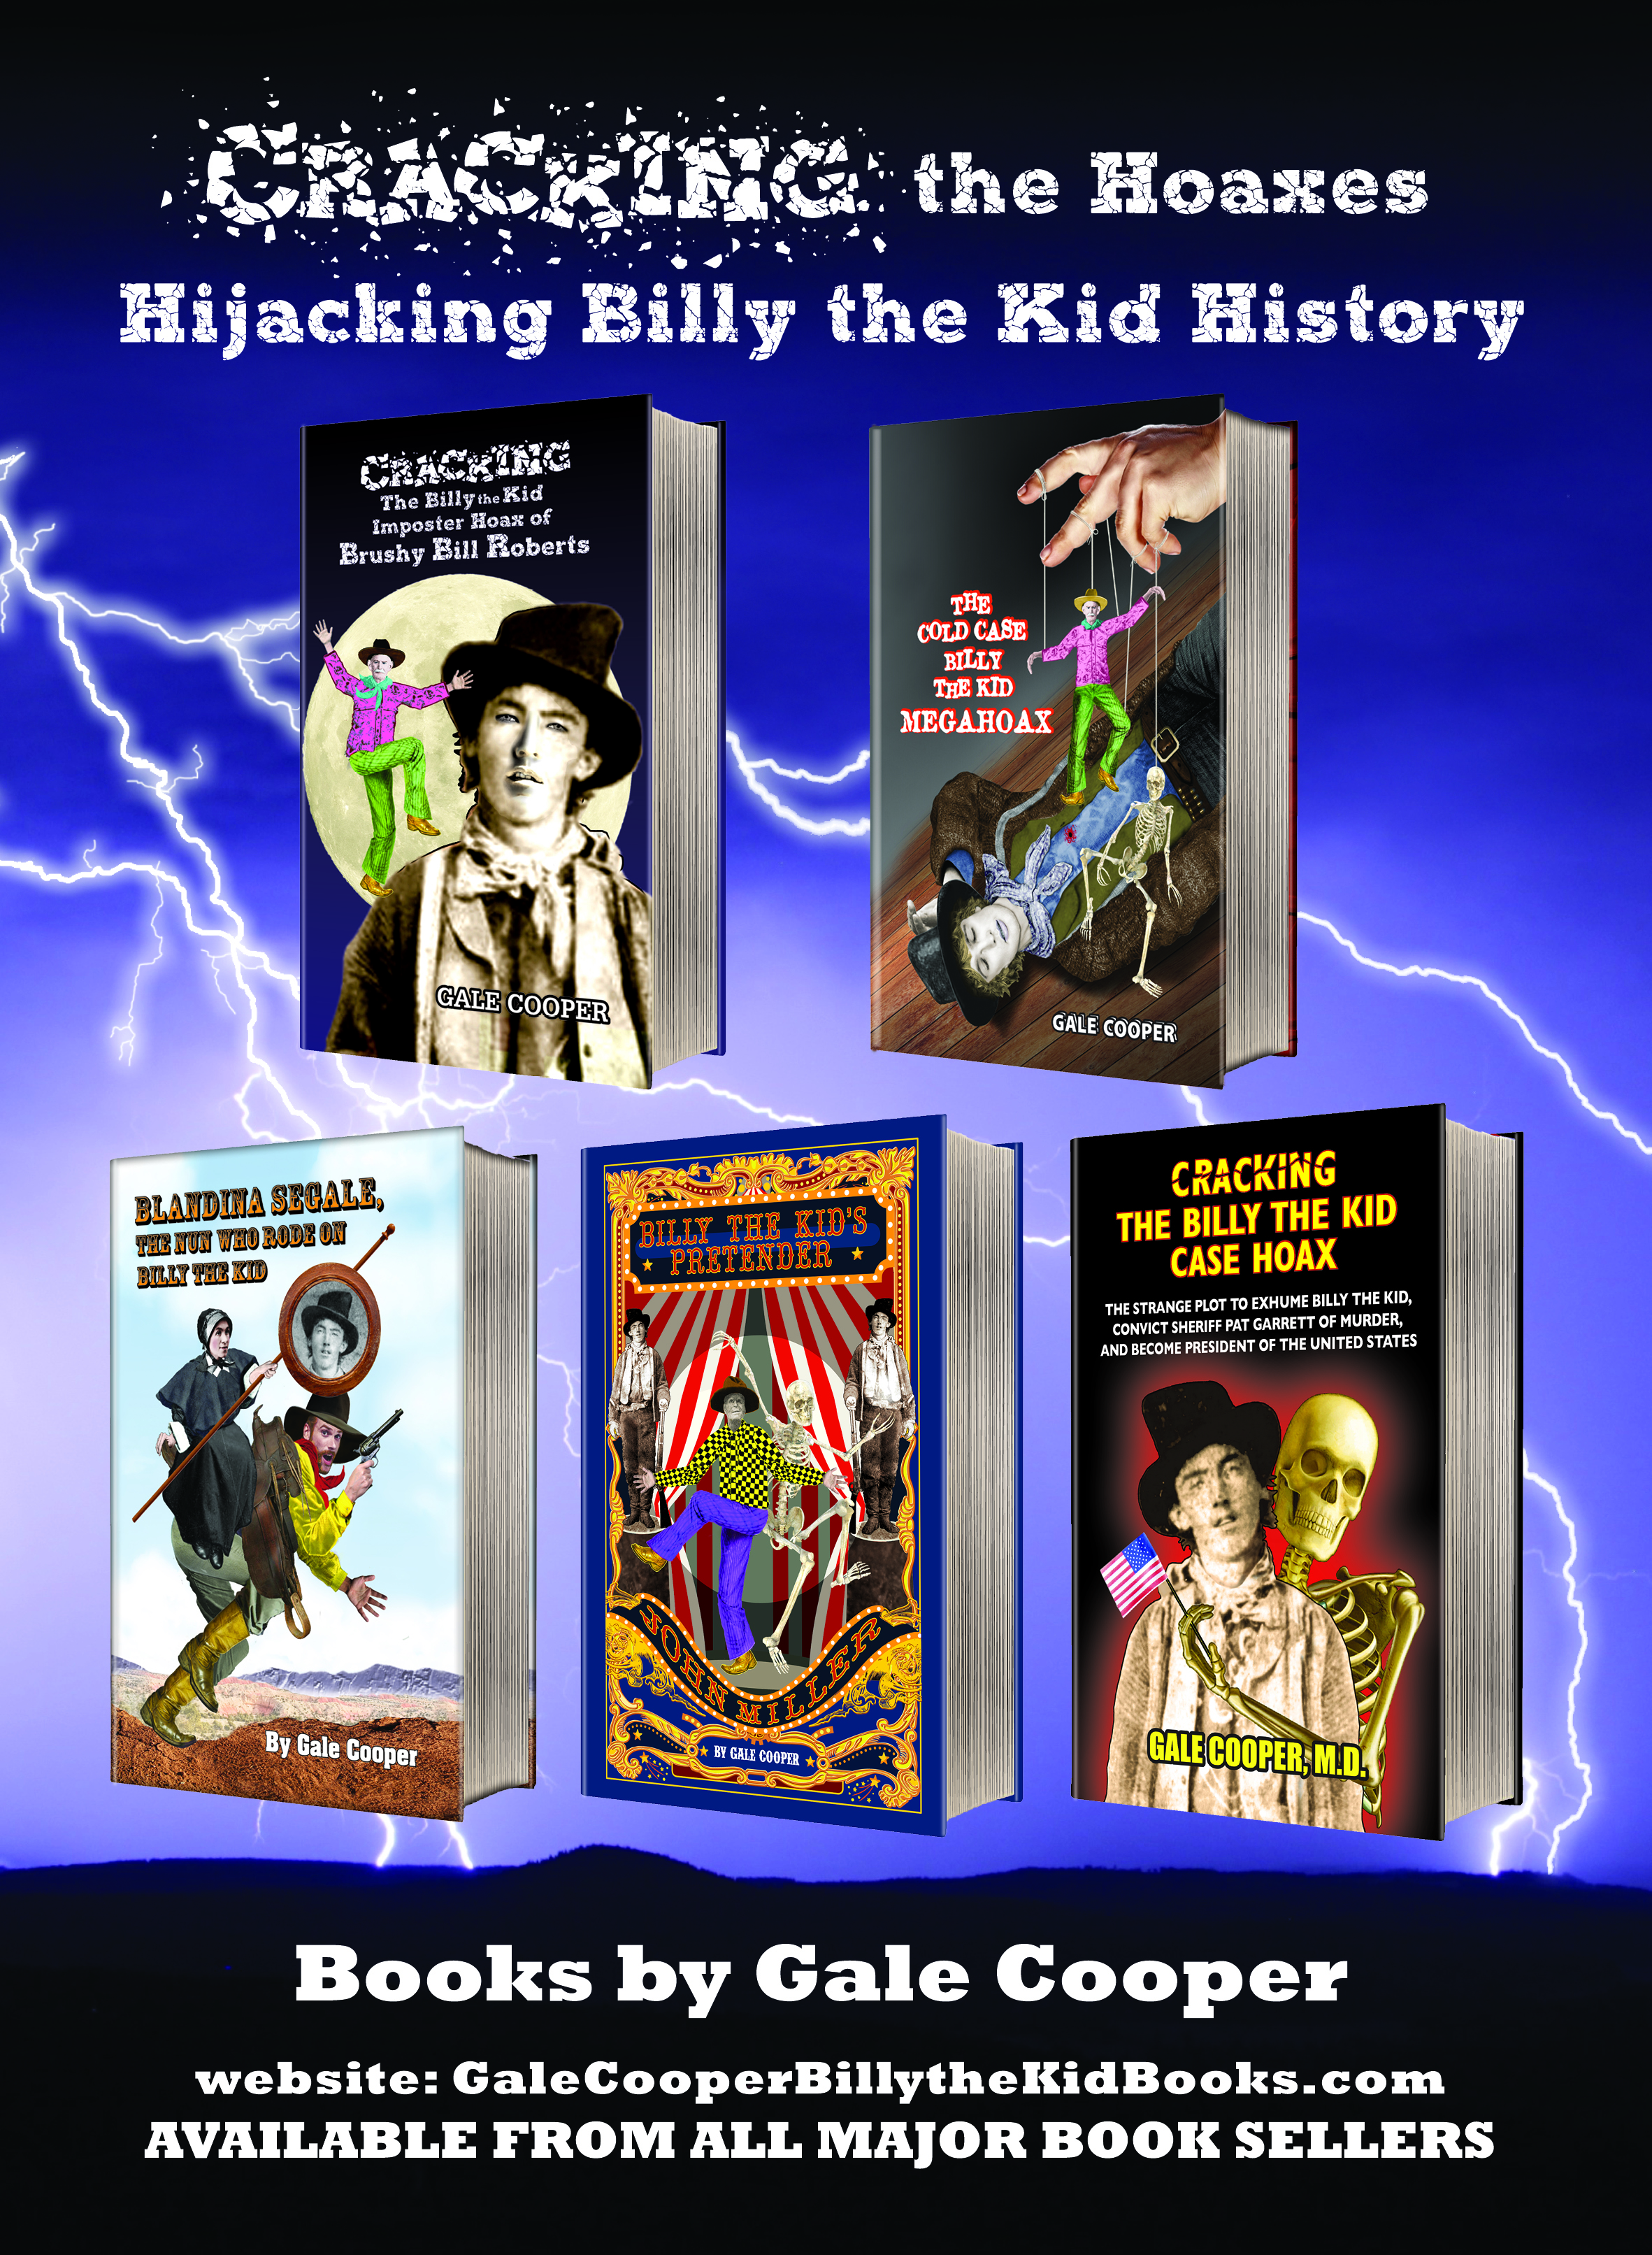 Gale Cooper's Cracking the Hoaxes: Hijacking Billy the Kid History